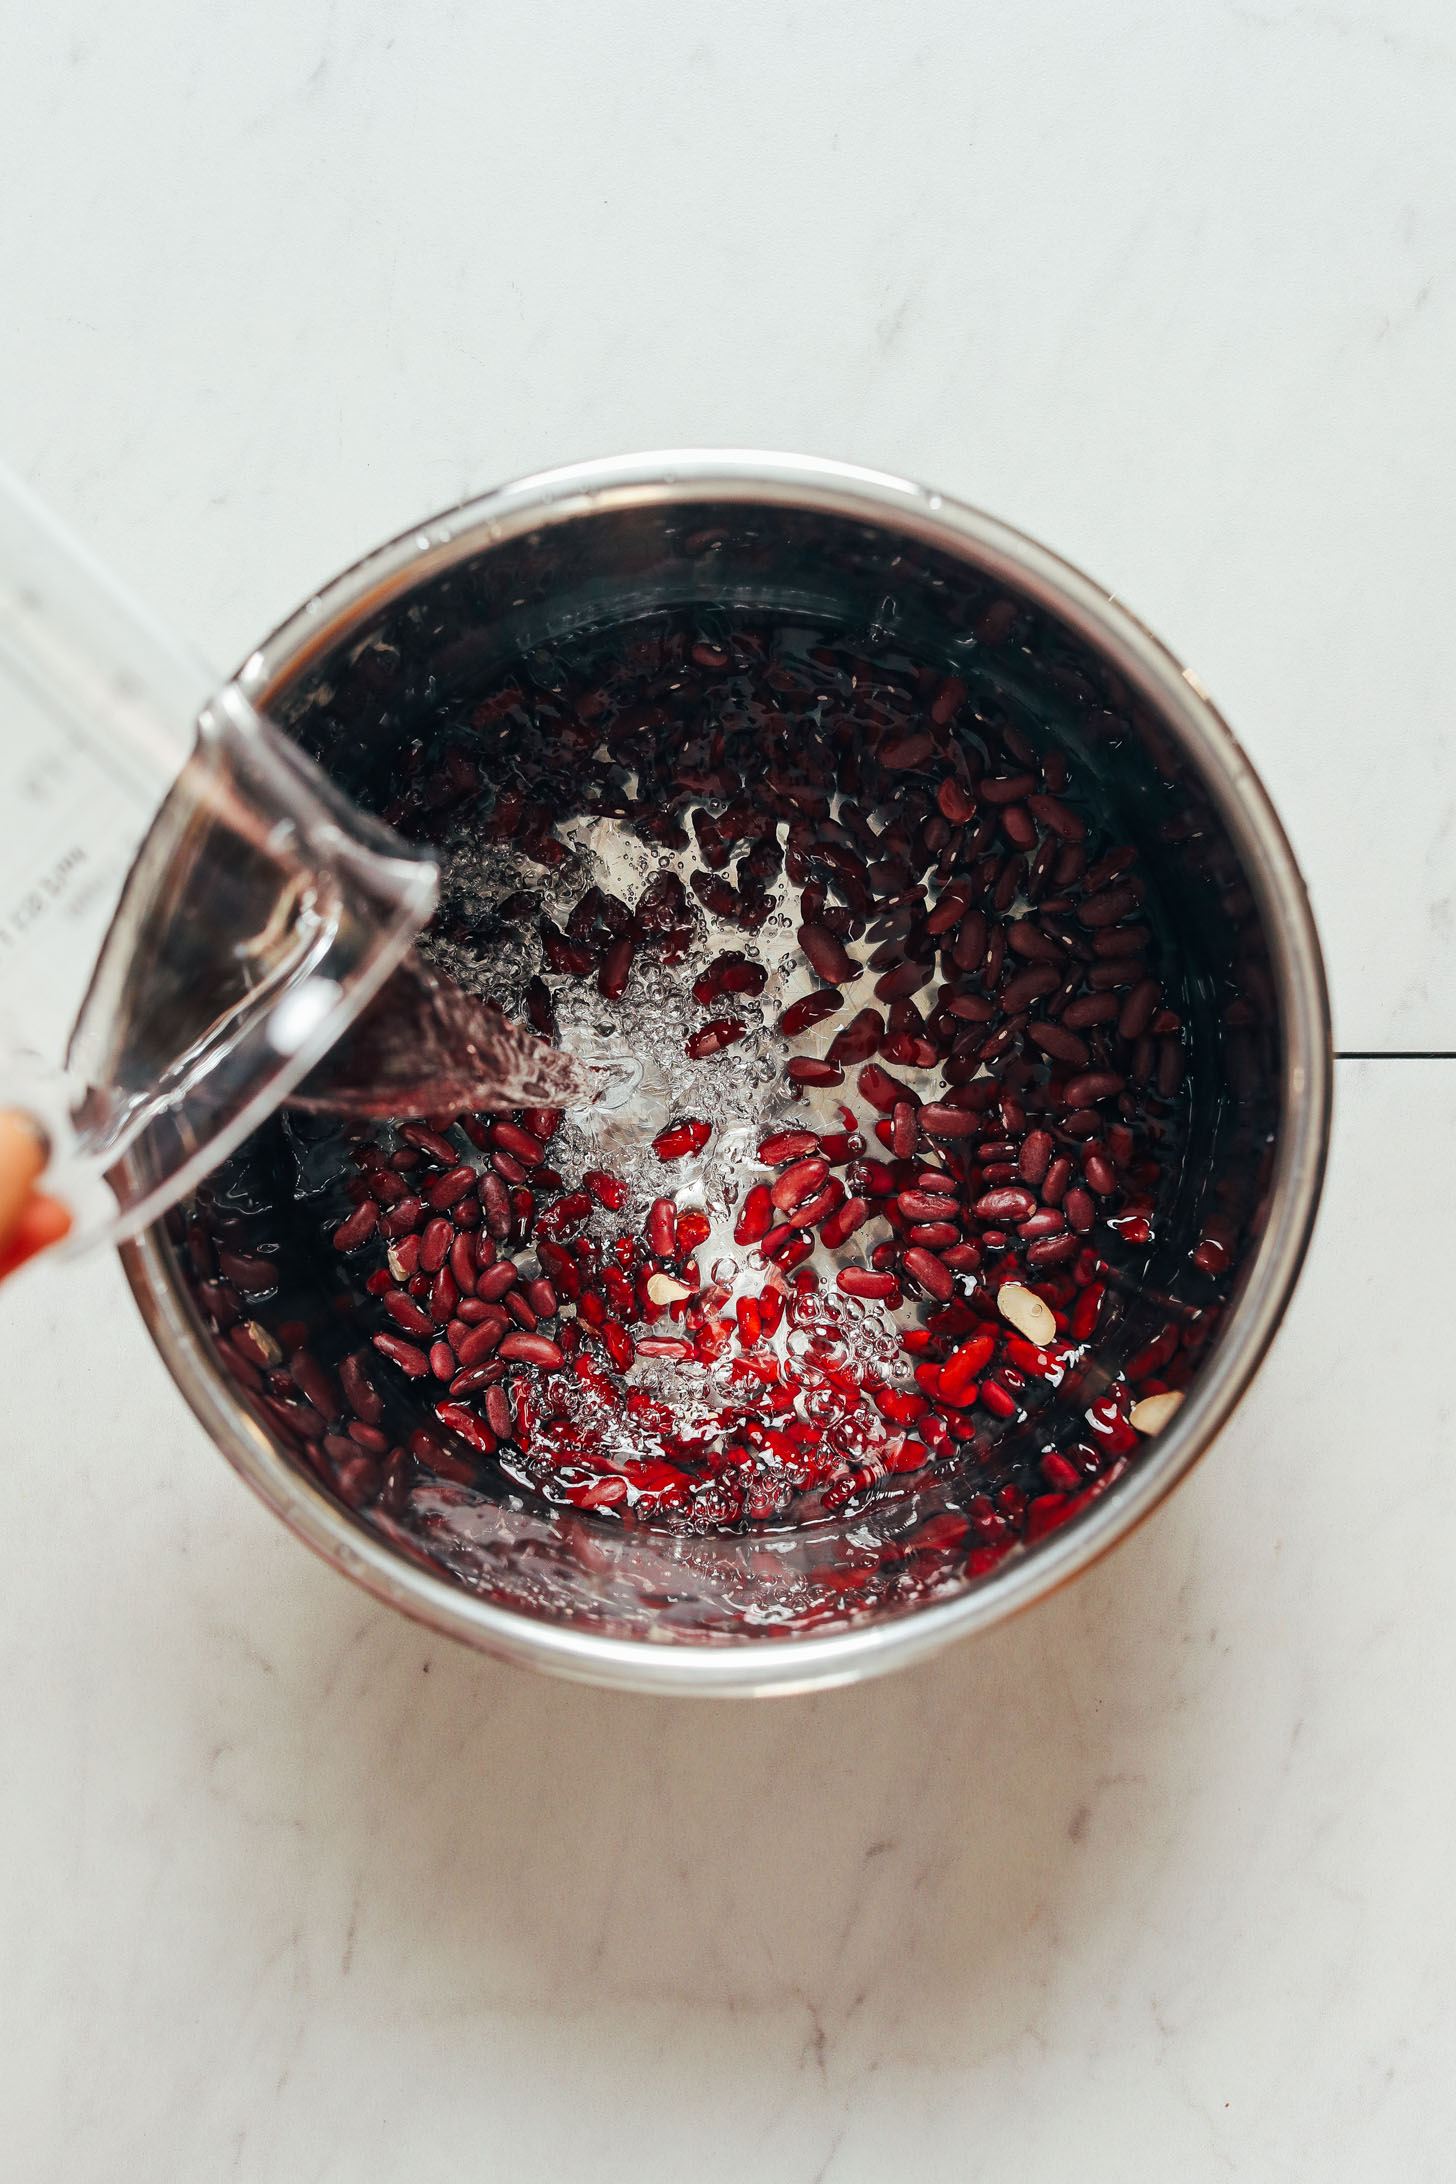 Pouring water into an Instant Pot of dried kidney beans